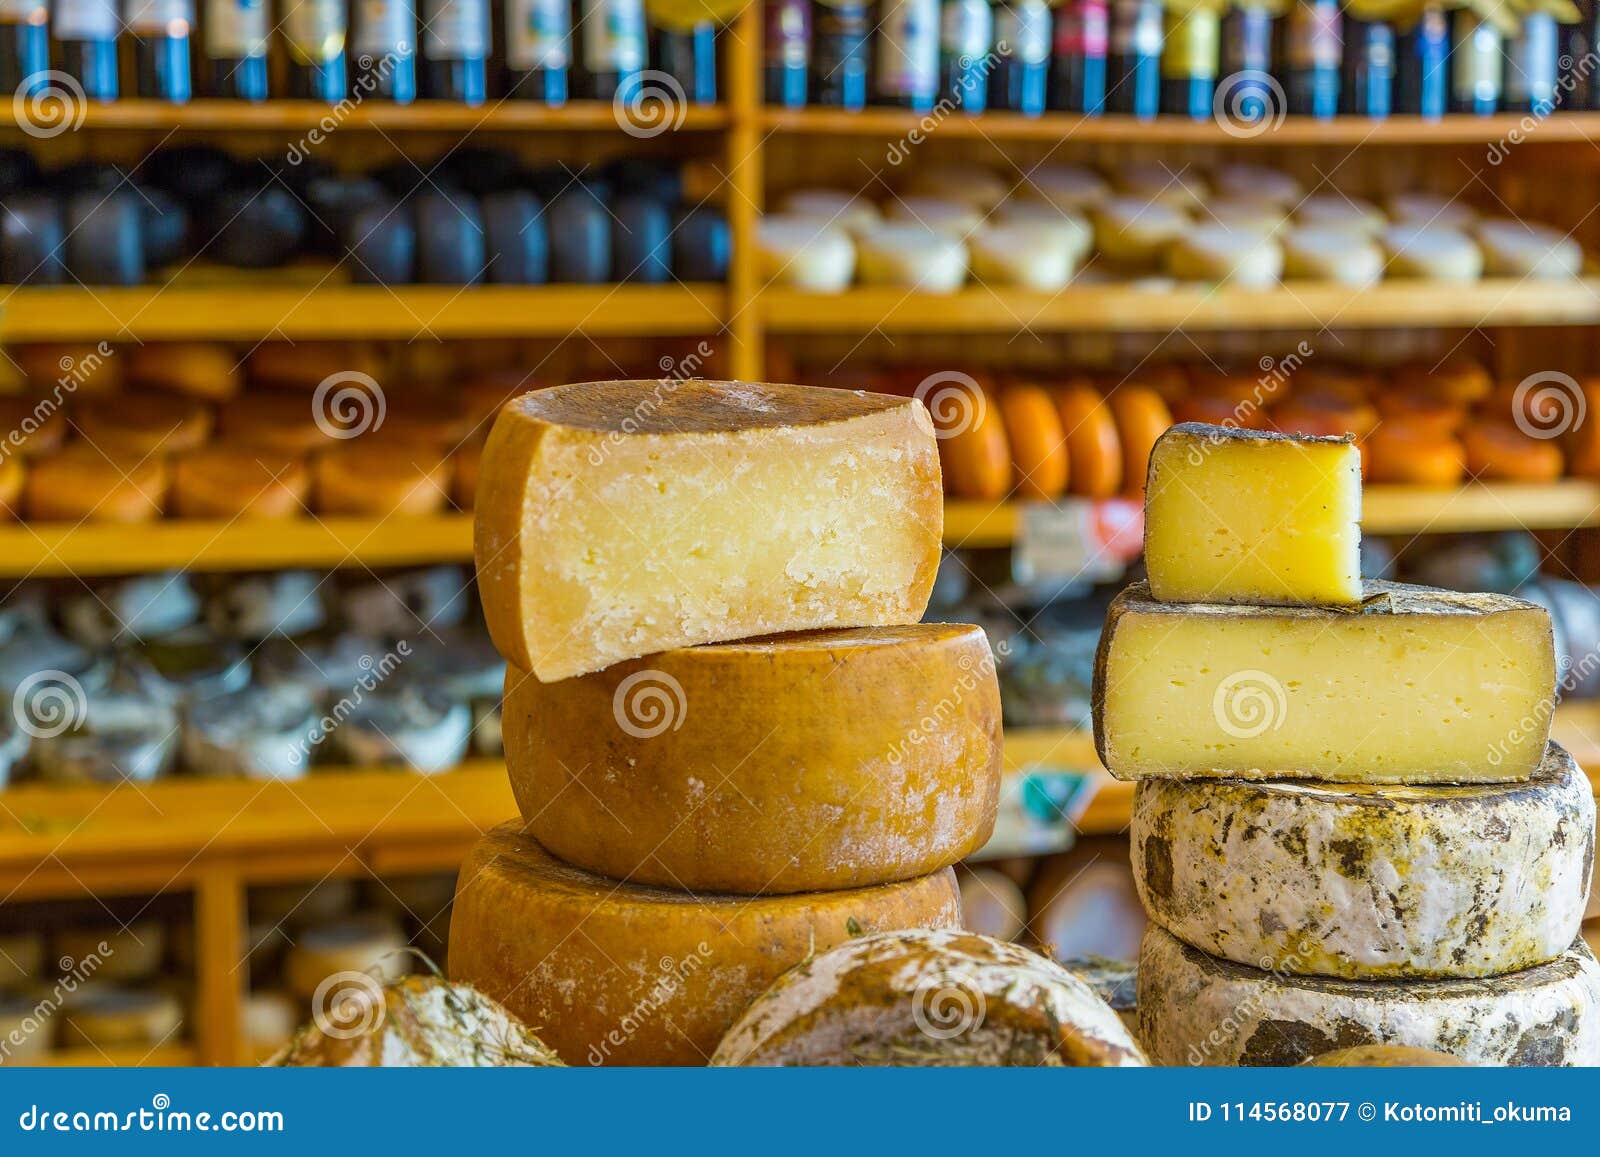 cheese heads on the counter in a gastronomic store